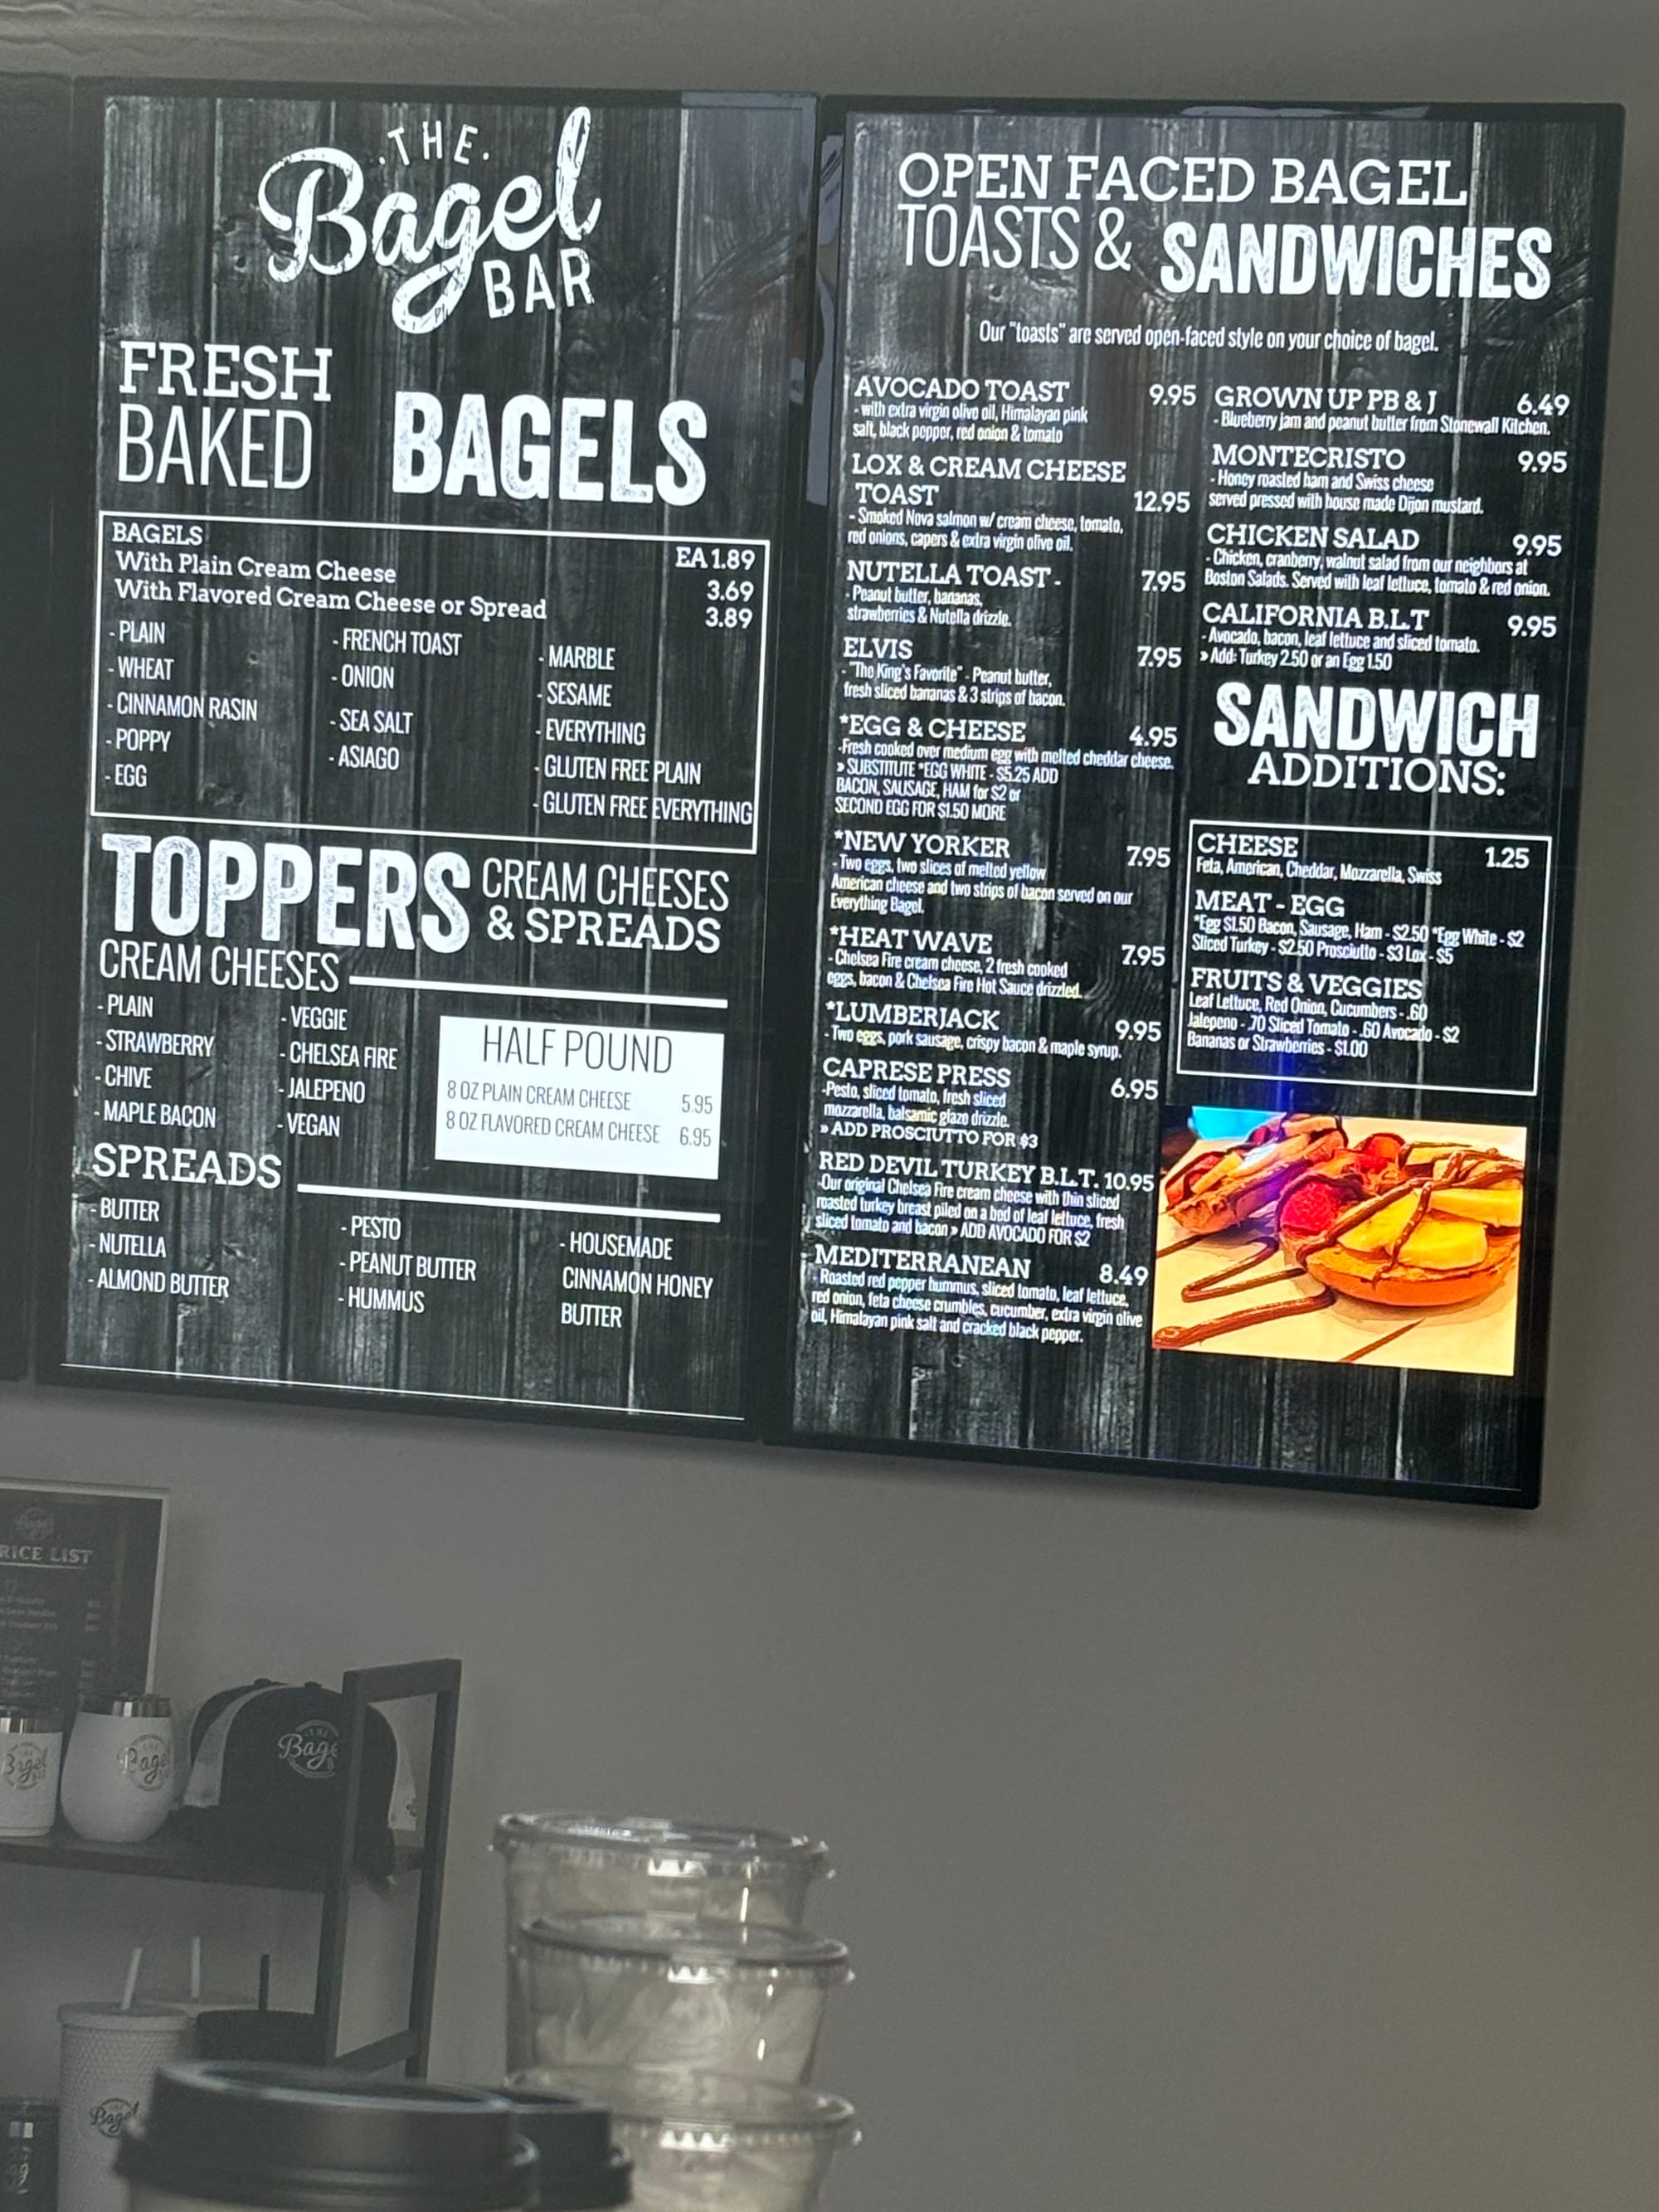 Bagel Bar officially opens its doors on Thompson Street